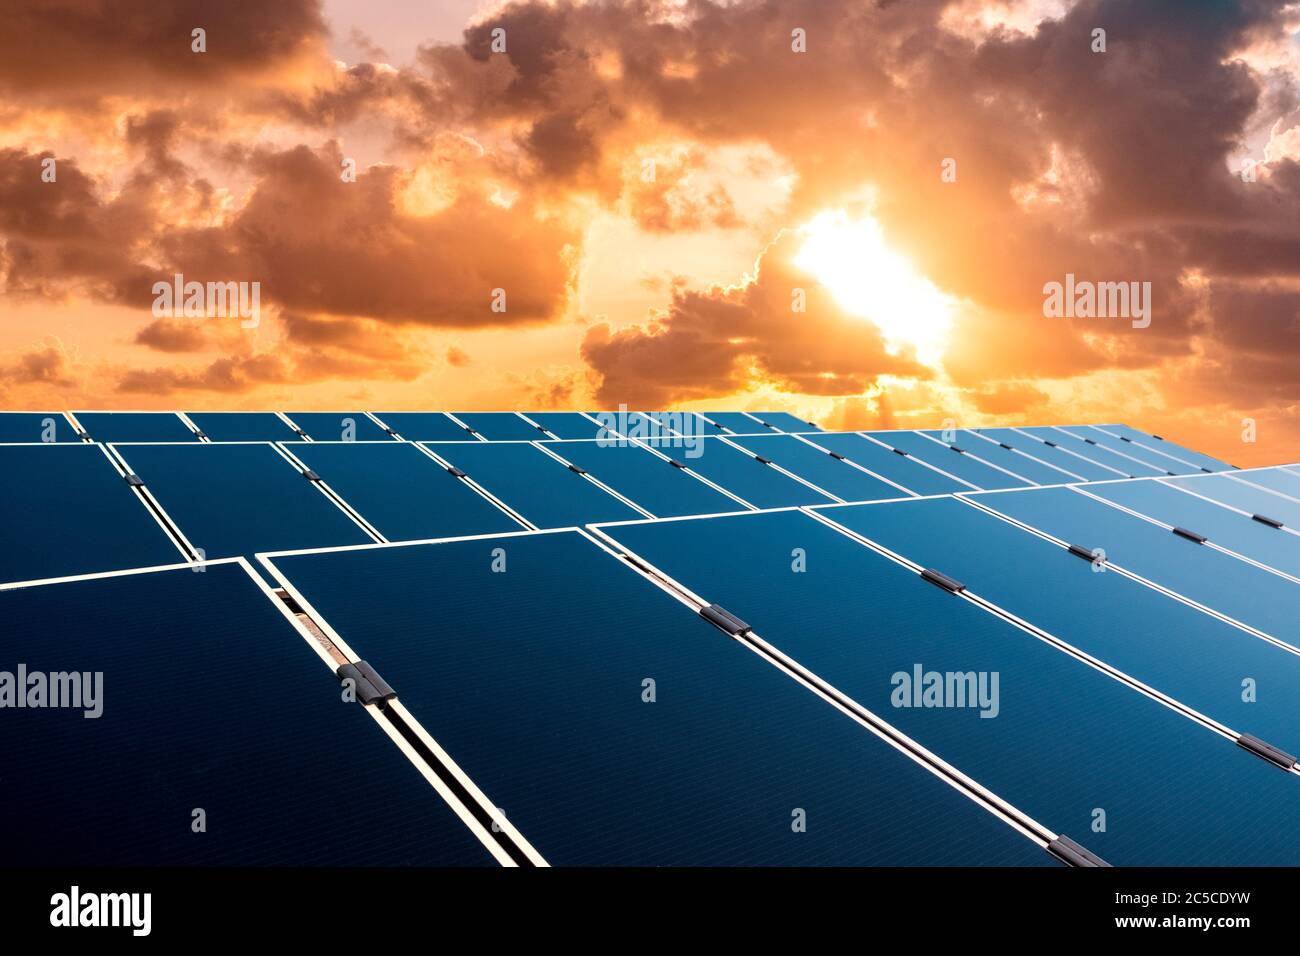 solar energy concept, sunset sky over photovoltaic panels Stock Photo